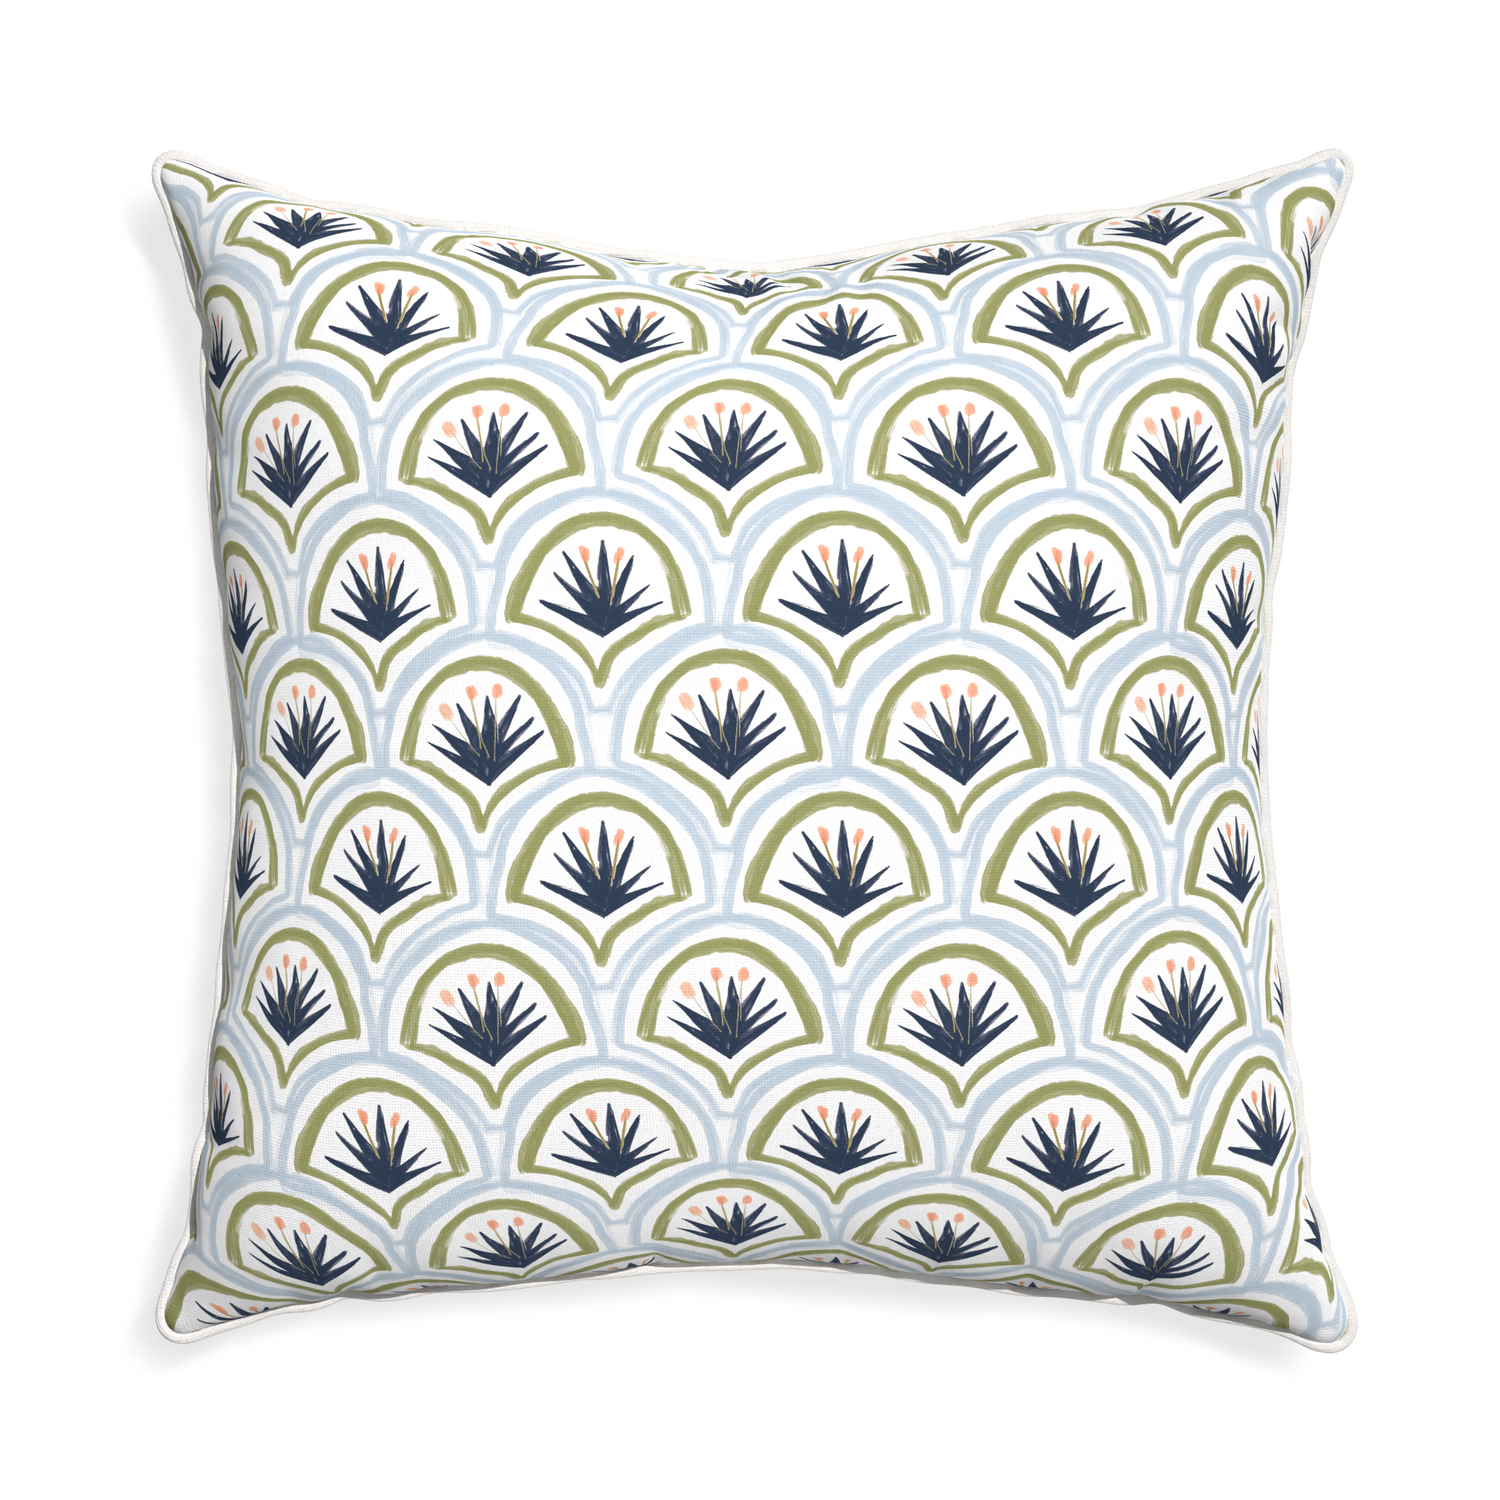 Euro-sham thatcher midnight custom art deco palm patternpillow with snow piping on white background